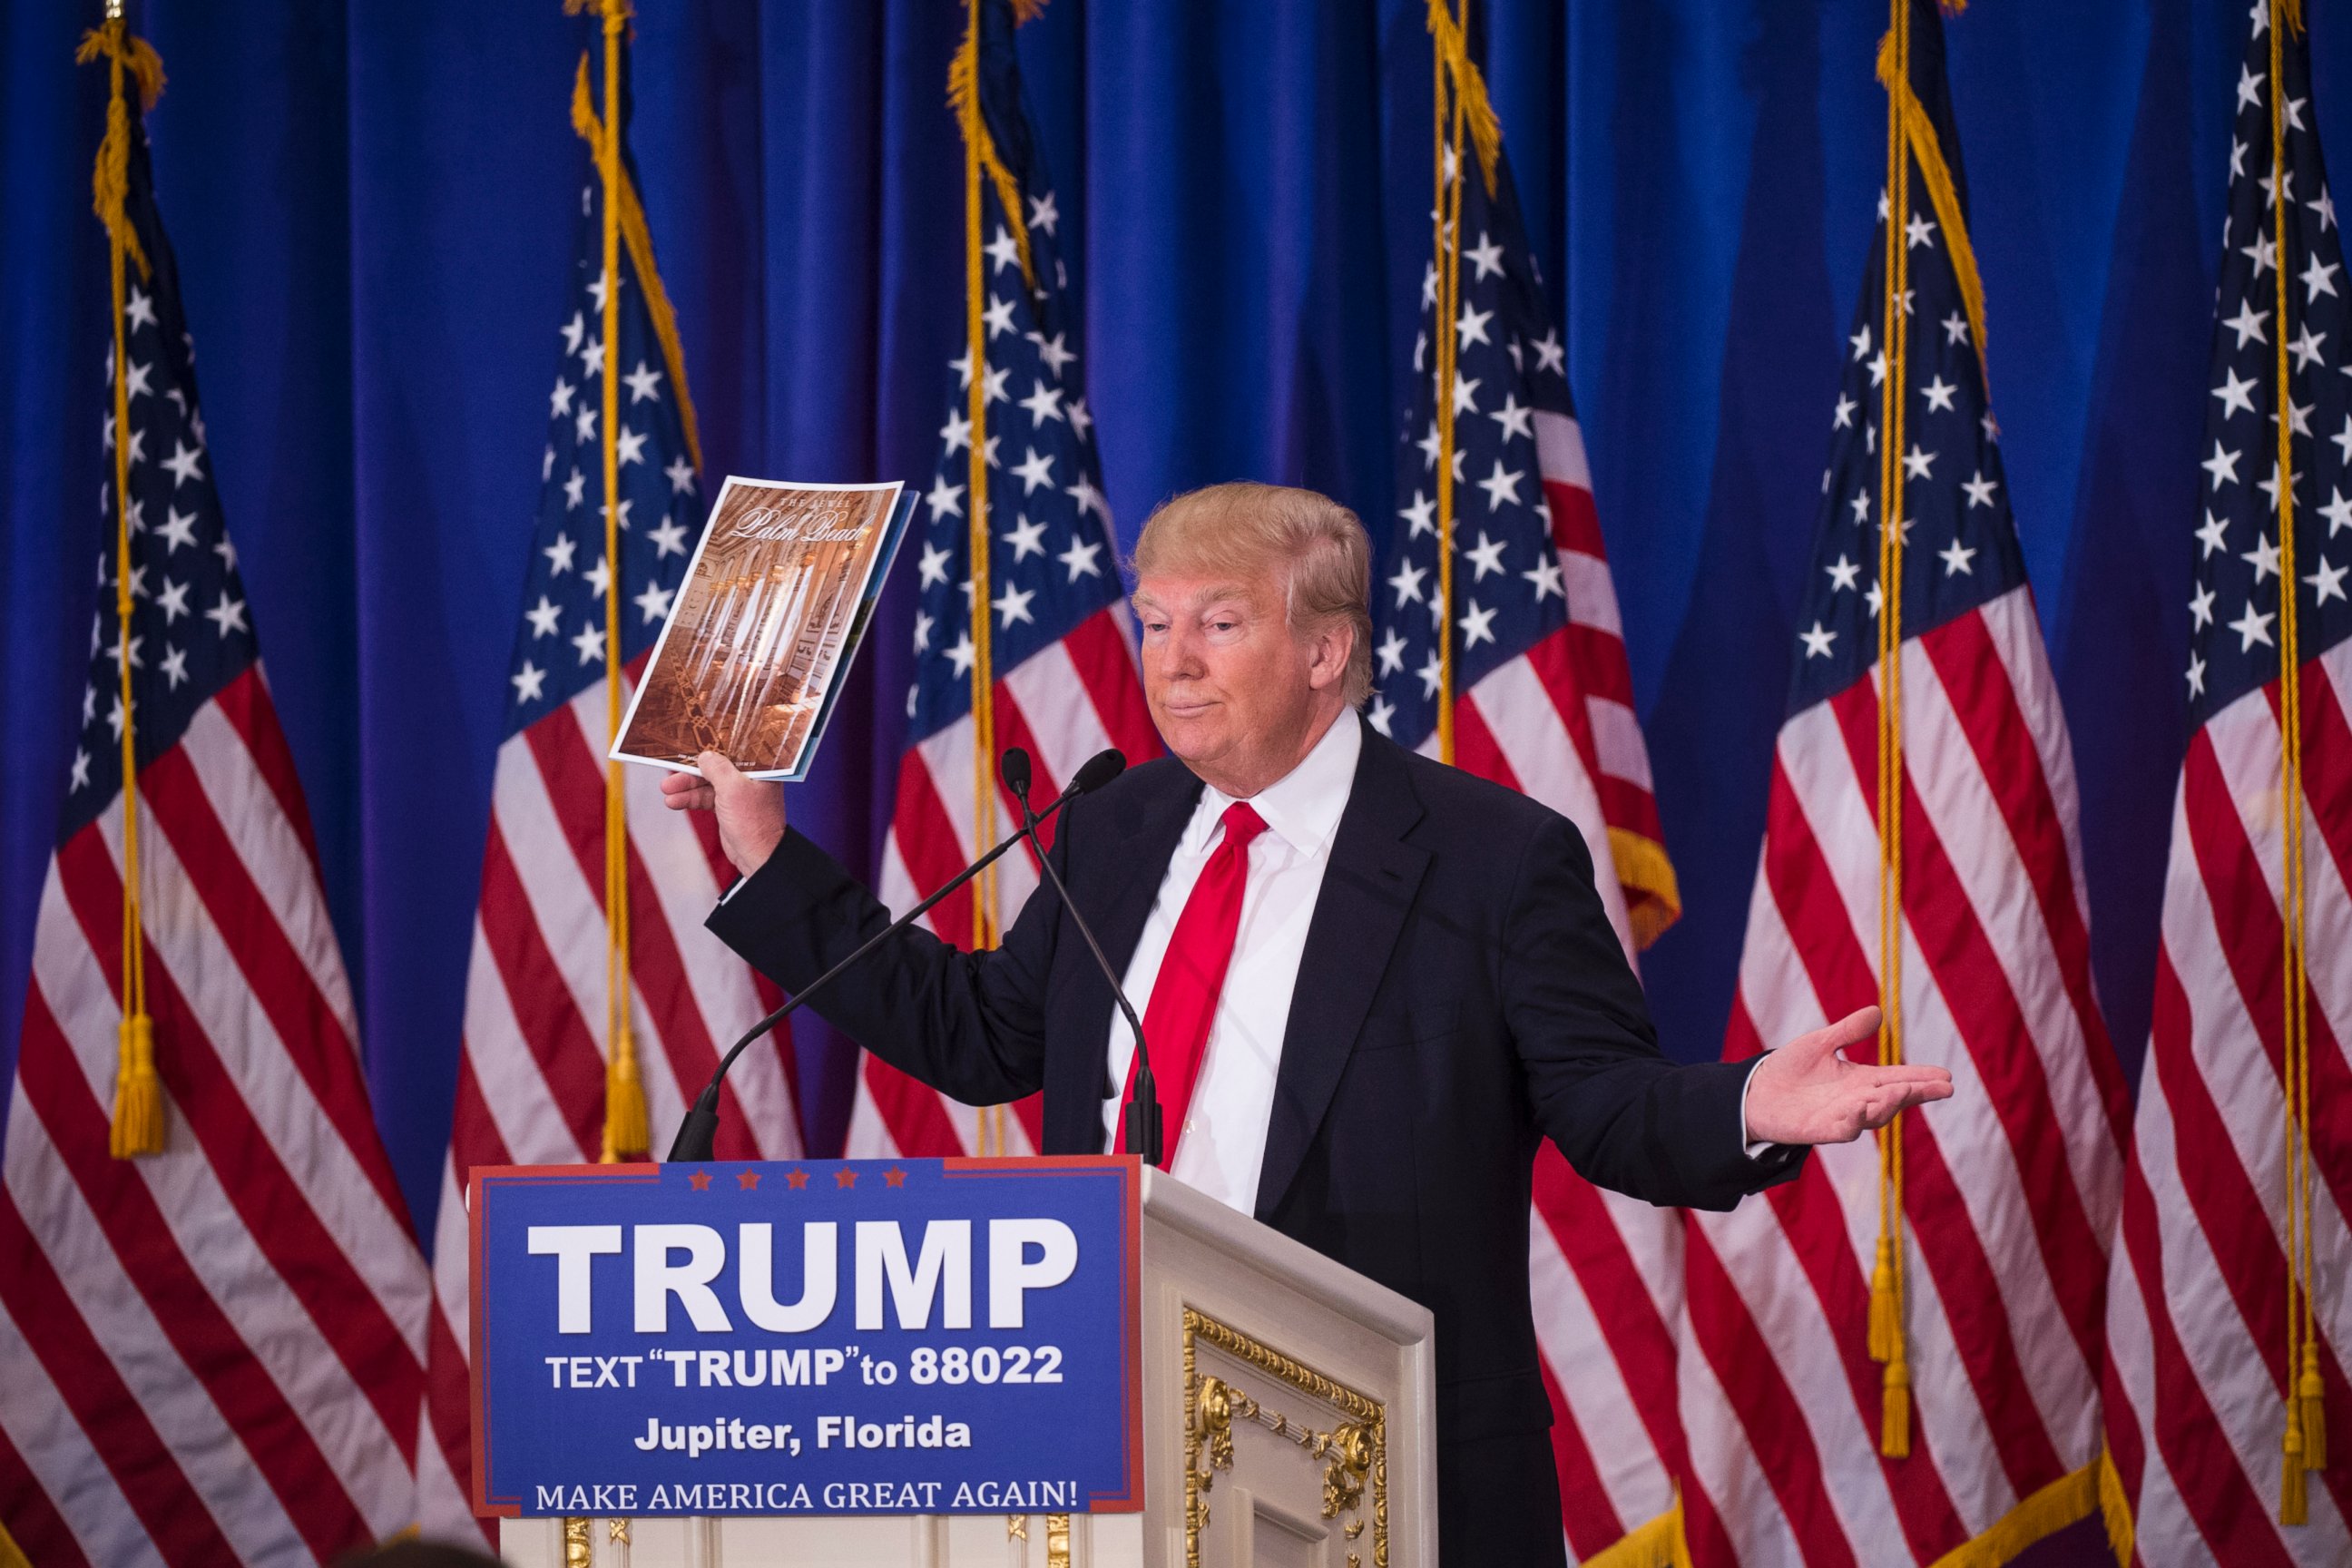 PHOTO:Donald Trump shows of his magazine as he speaks during a campaign press conference event at the Trump National Golf Club in Jupiter, Fla., March 08, 2016. 